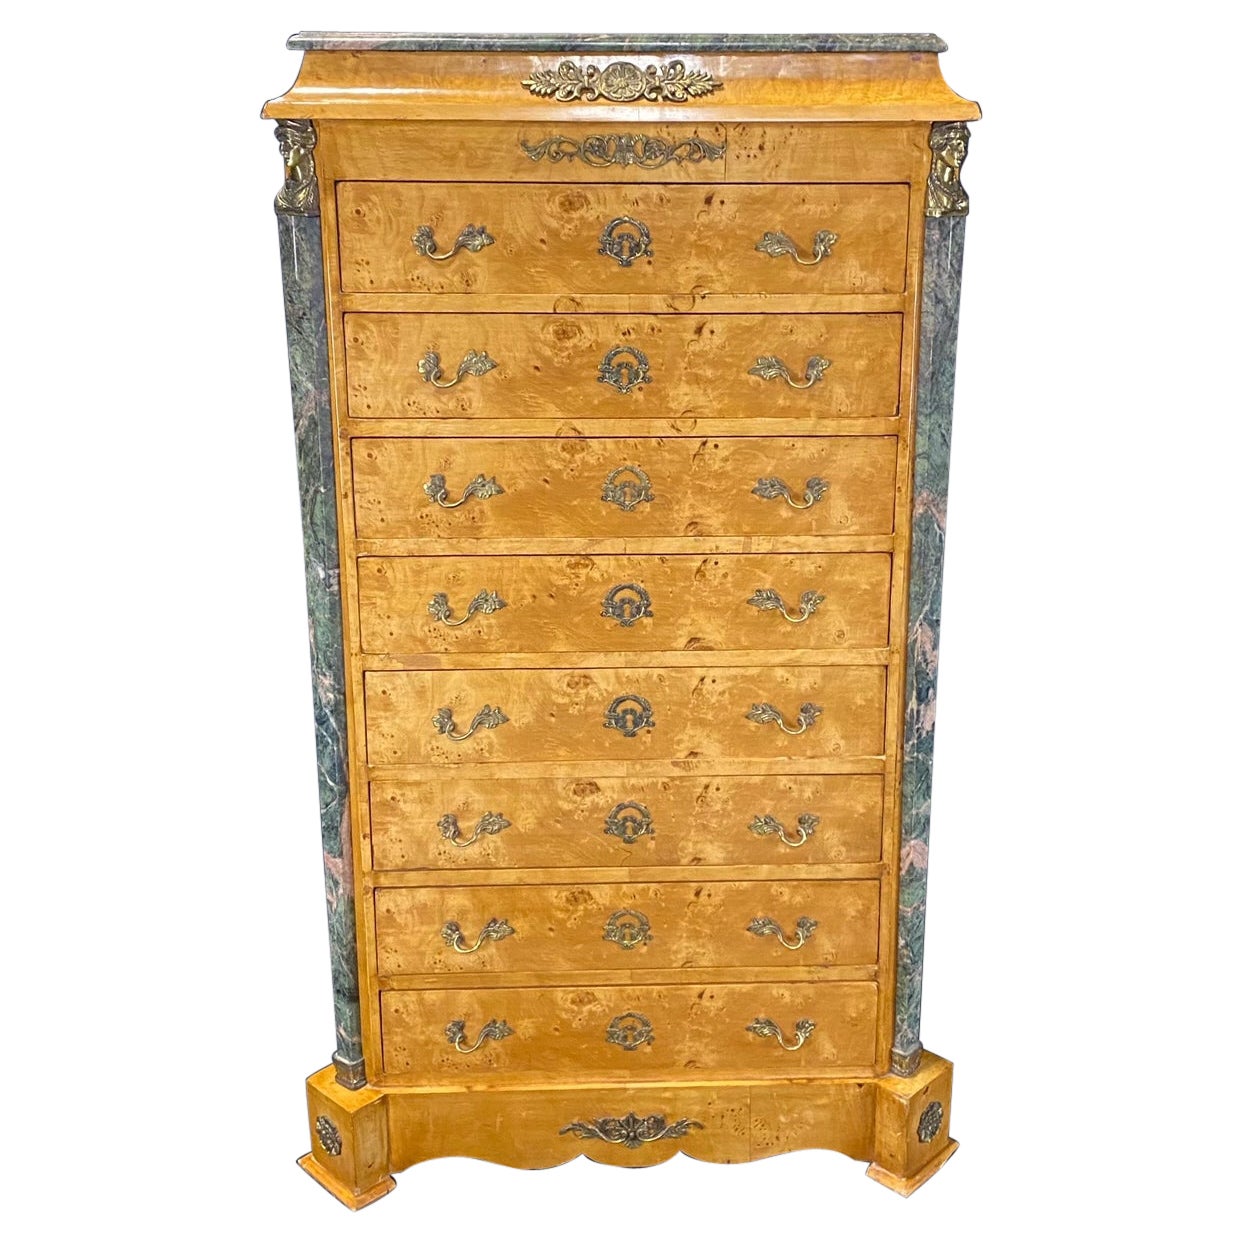 Exquisite French Louis XVI French Linen Chest or Commode with Marble Top